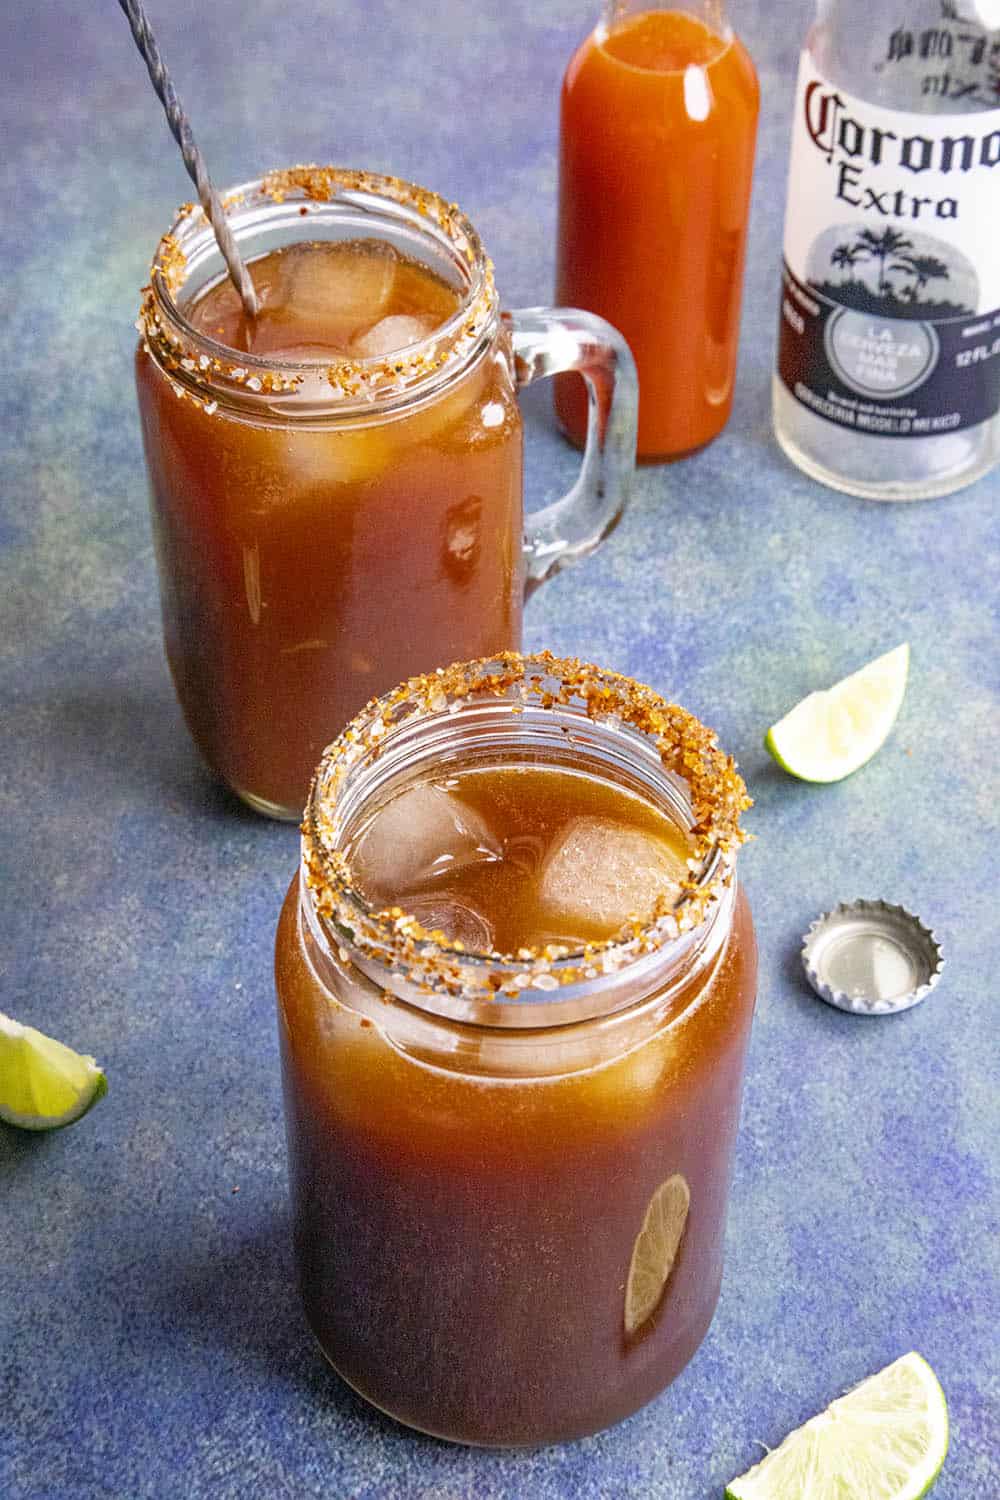 Two micheladas, Mexican beer and Clamato juice cocktails, ready to enjoy